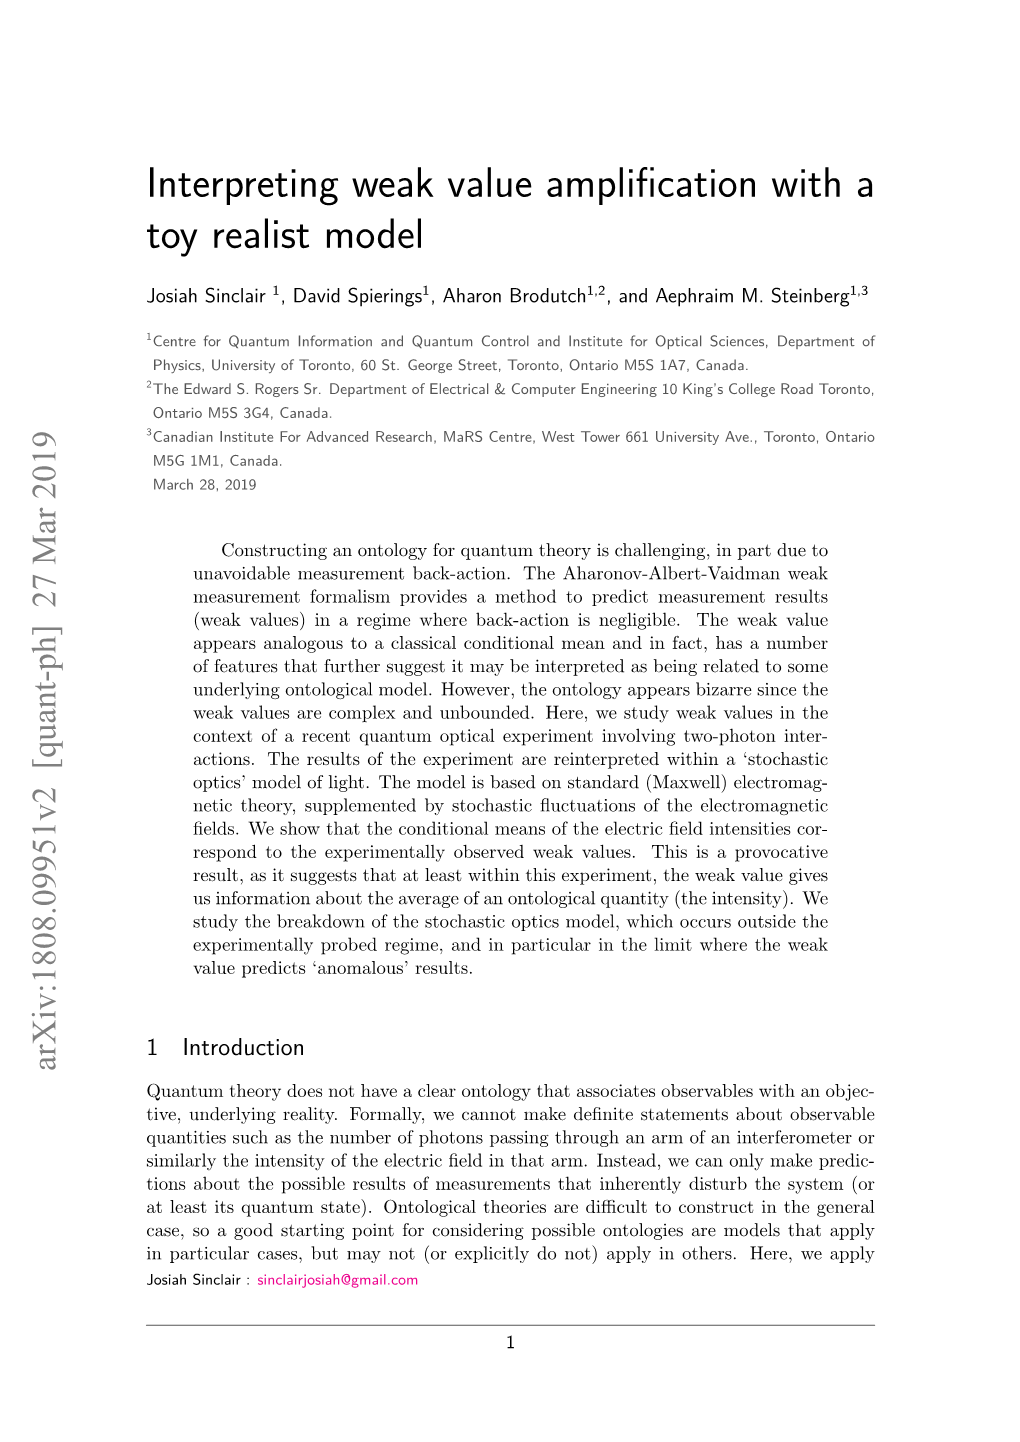 Interpreting Weak Value Amplification with a Toy Realist Model